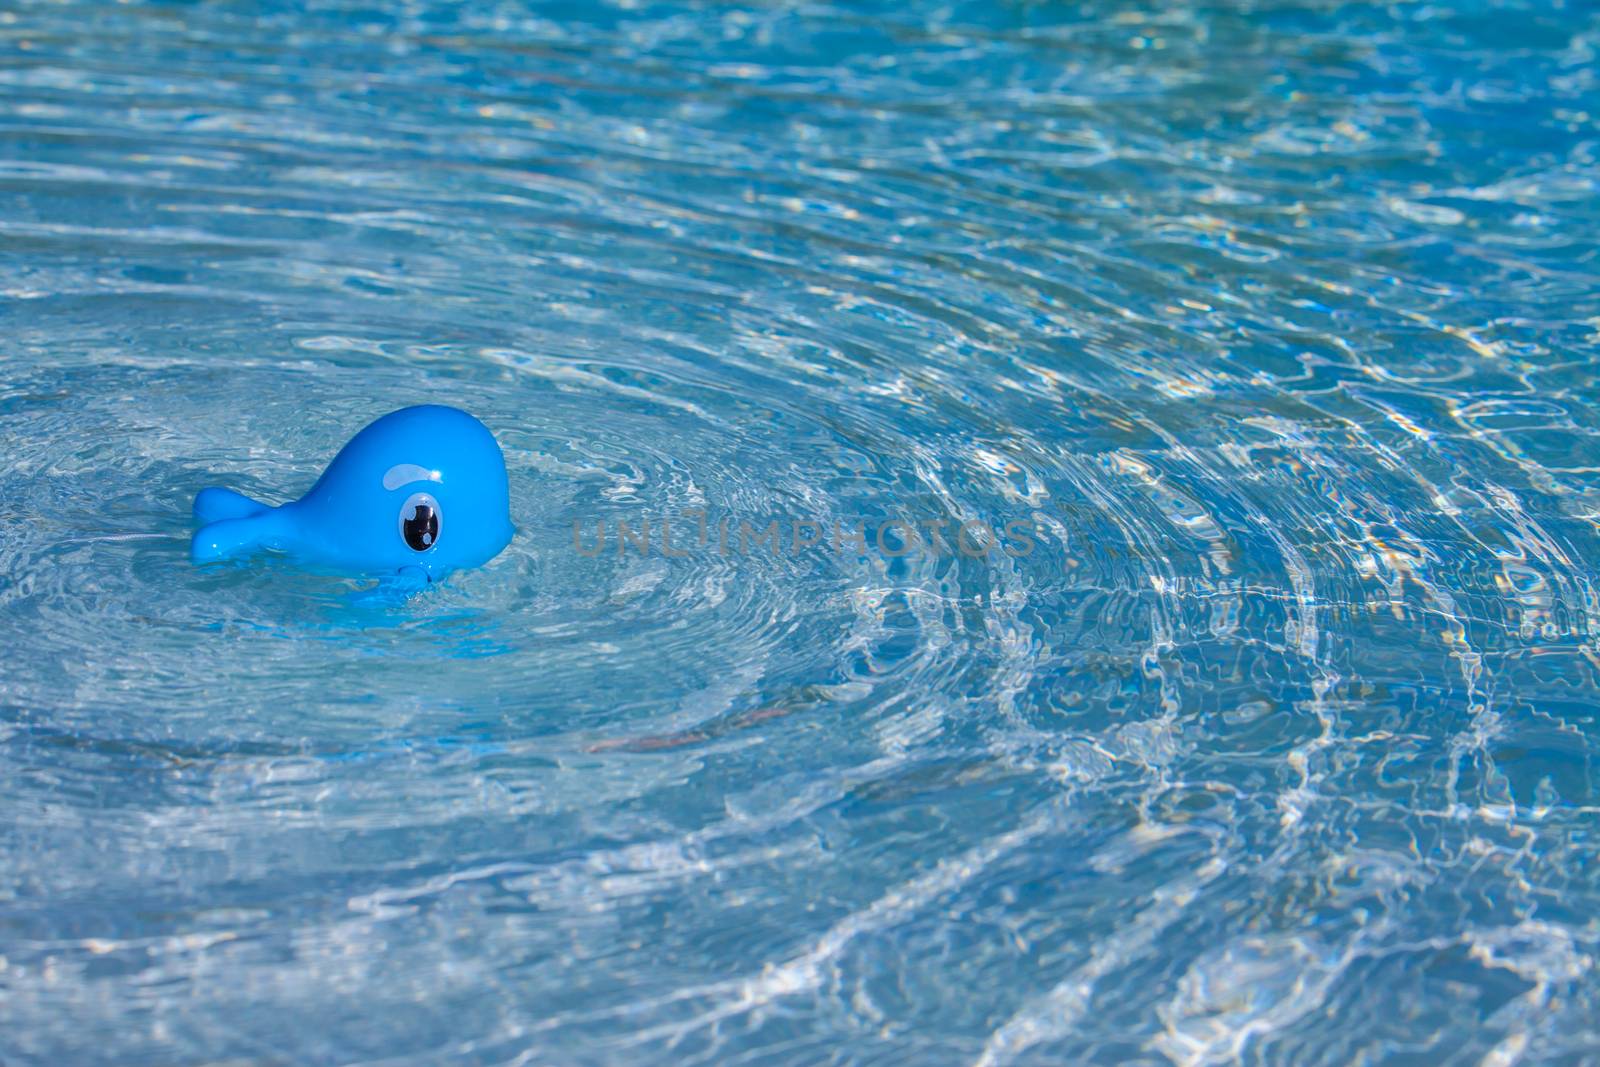 A whale shape baby toy swimming in a pool